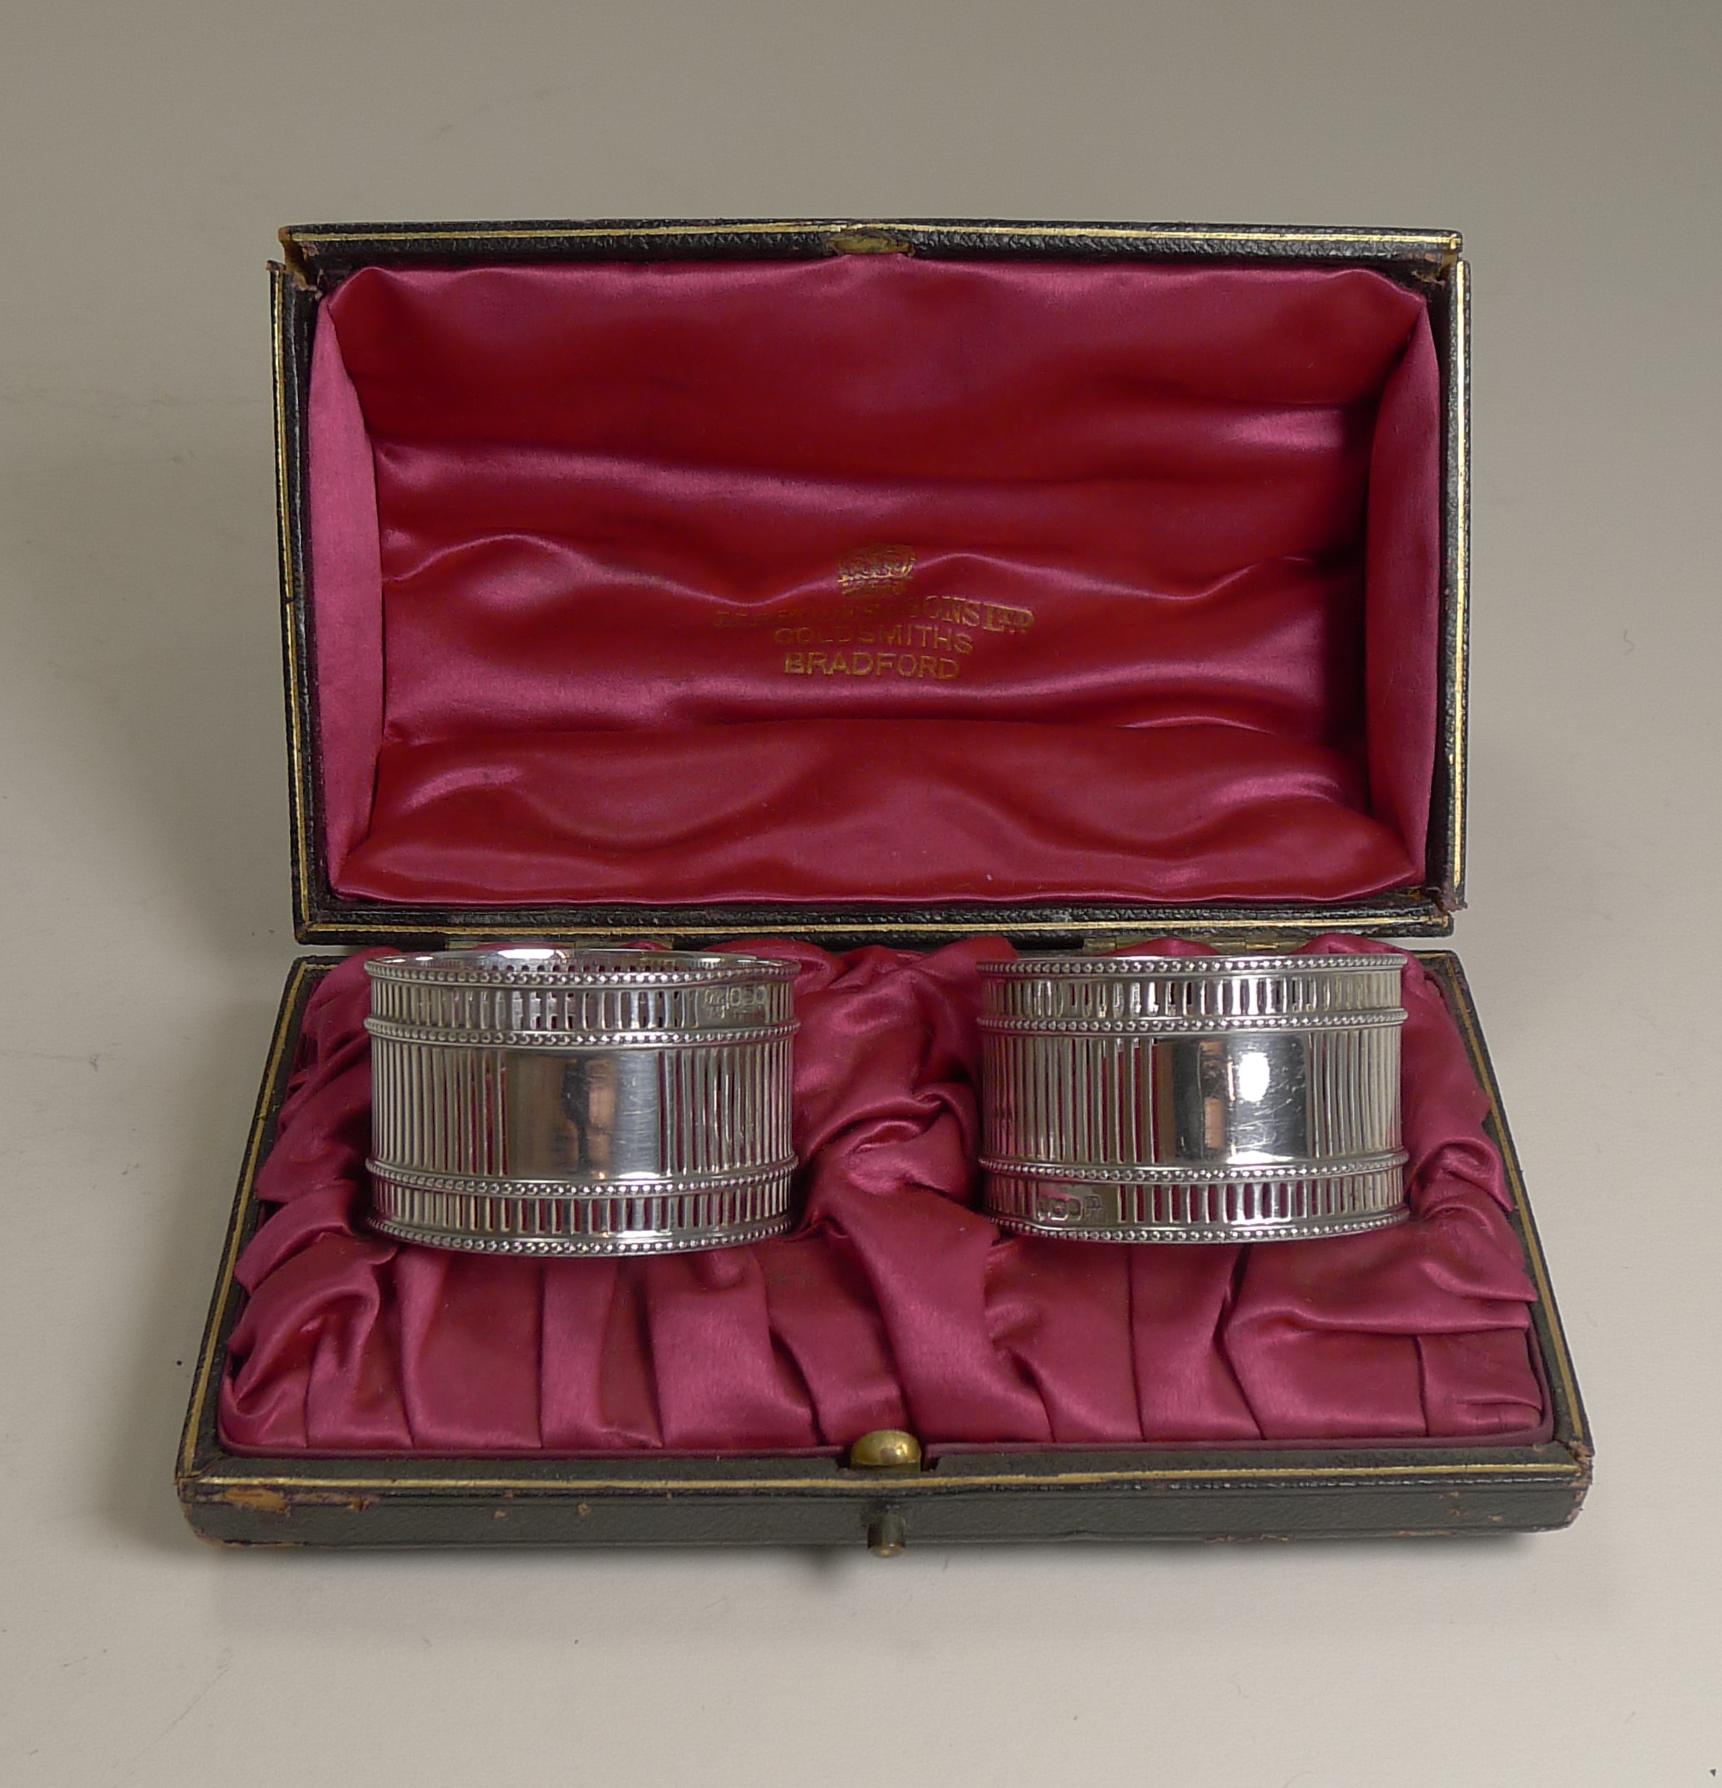 An unusual pair of Edwardian sterling silver napkin rings fully hallmarked for Sheffield 1902. The makers mark is also present for the silversmith, Hawksworth, Eyre & Co Ltd.

They have a simple pierced or reticulated design each with a vacant